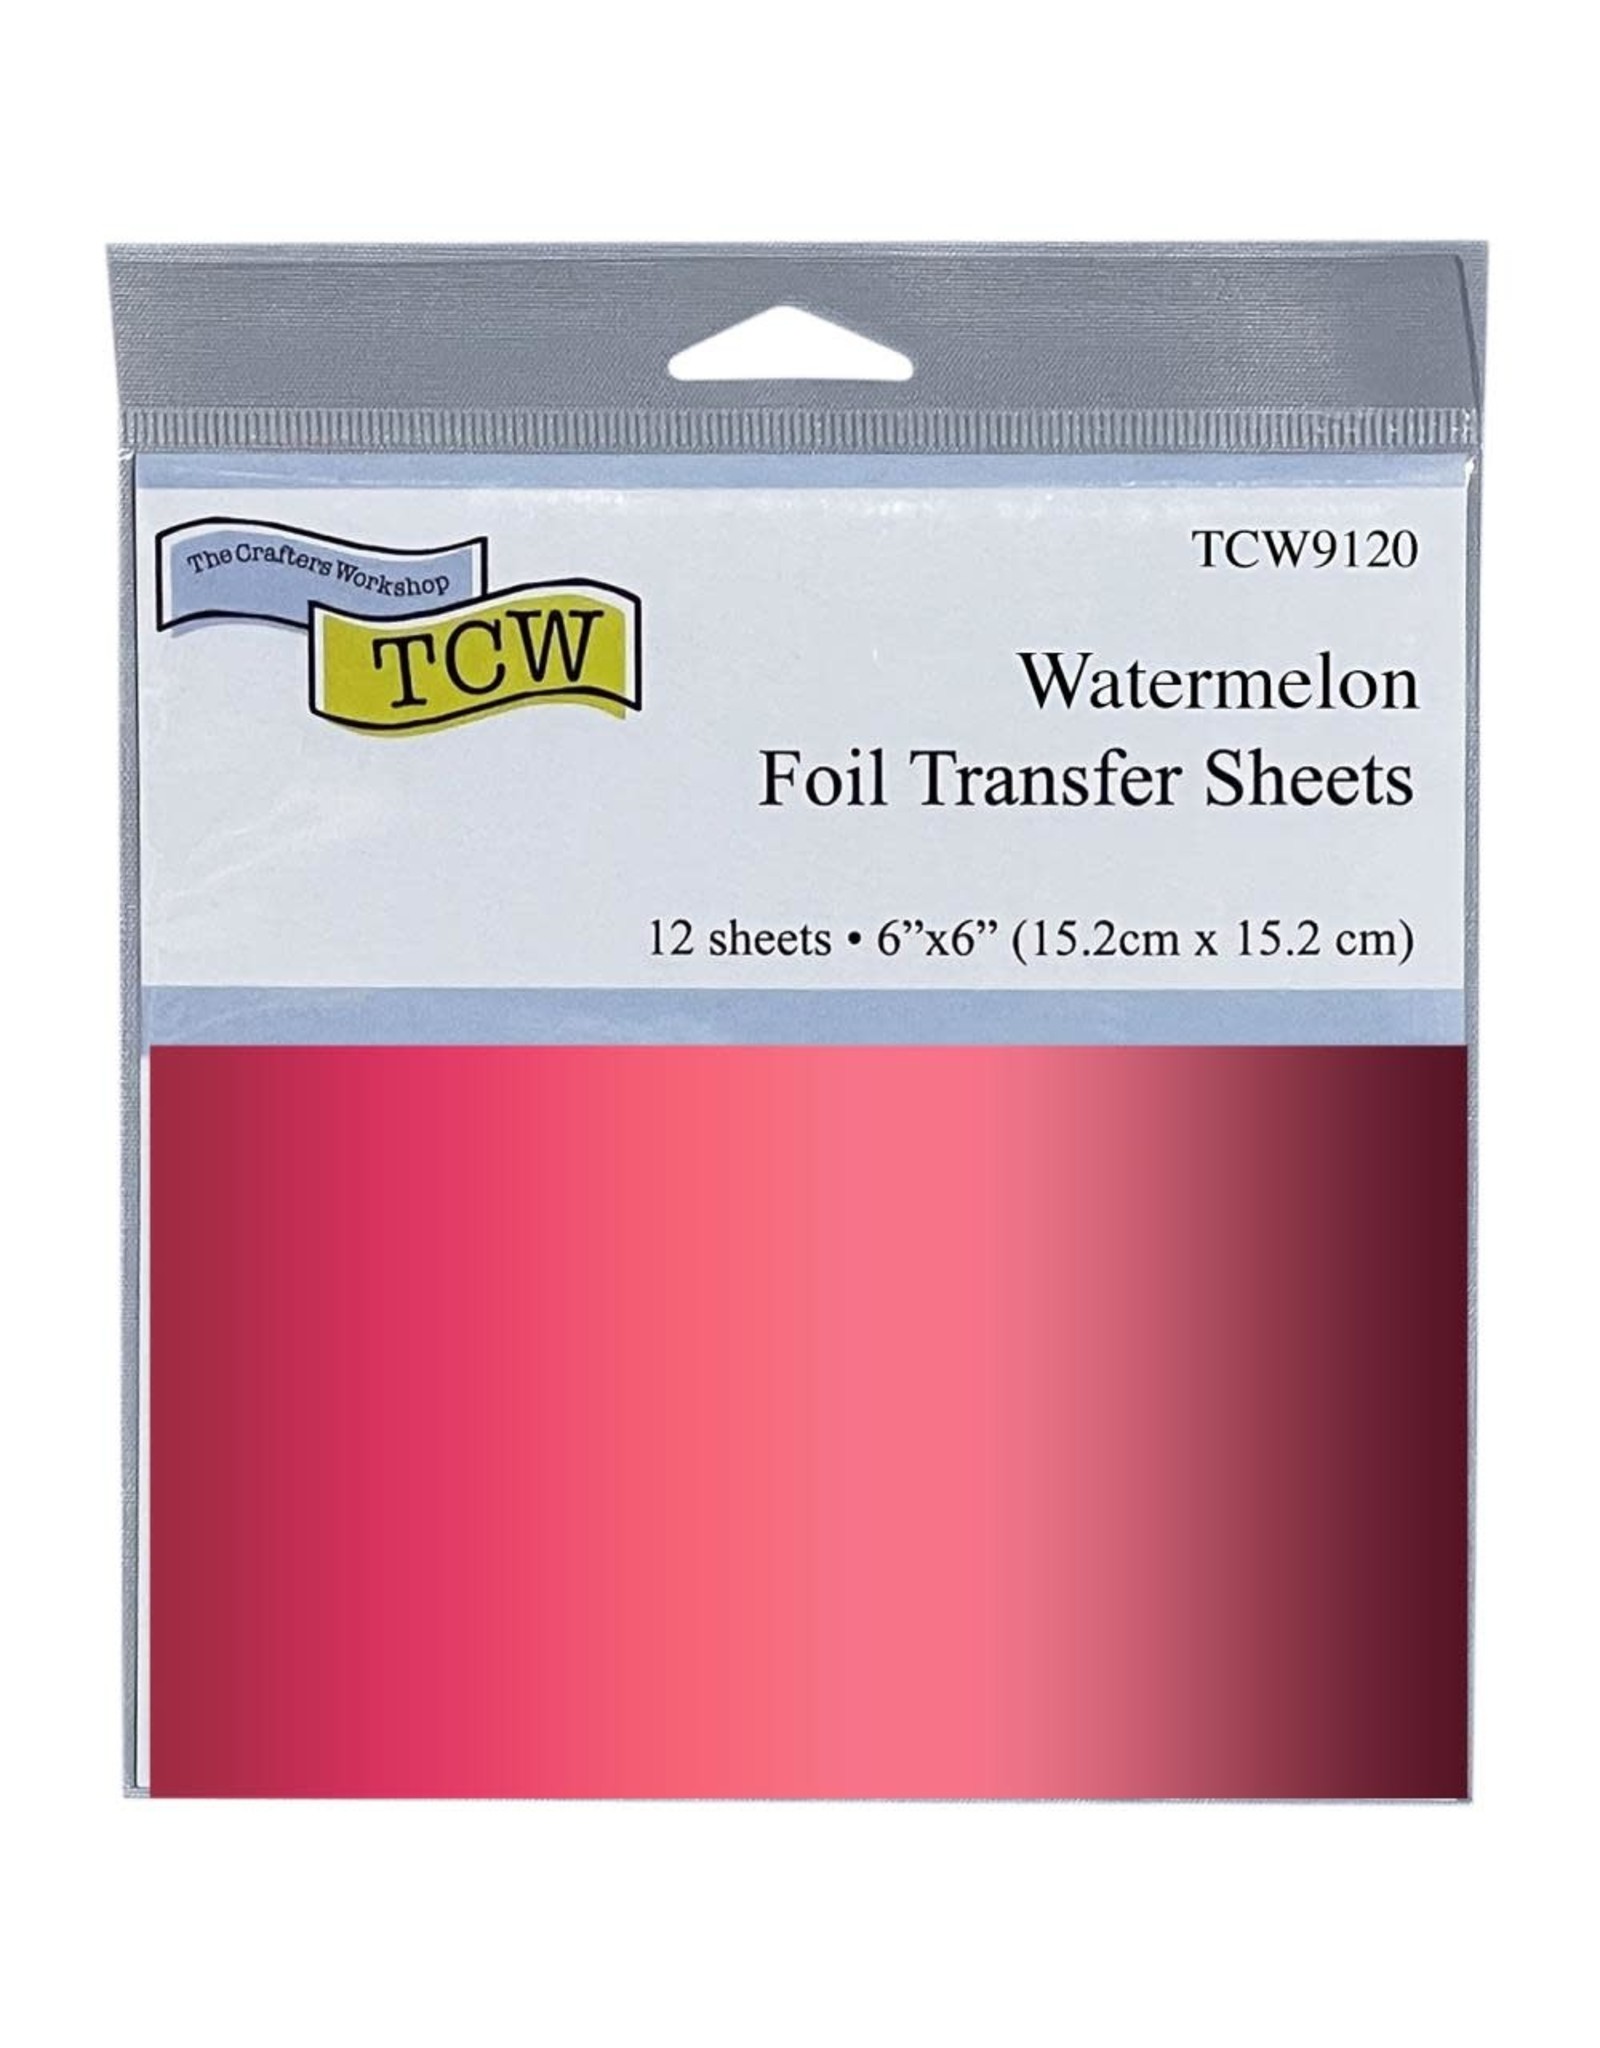 THERMOWEB THE CRAFTER'S WORKSHOP WATERMELON 6x6 FOIL TRANSFER SHEETS 12/PK